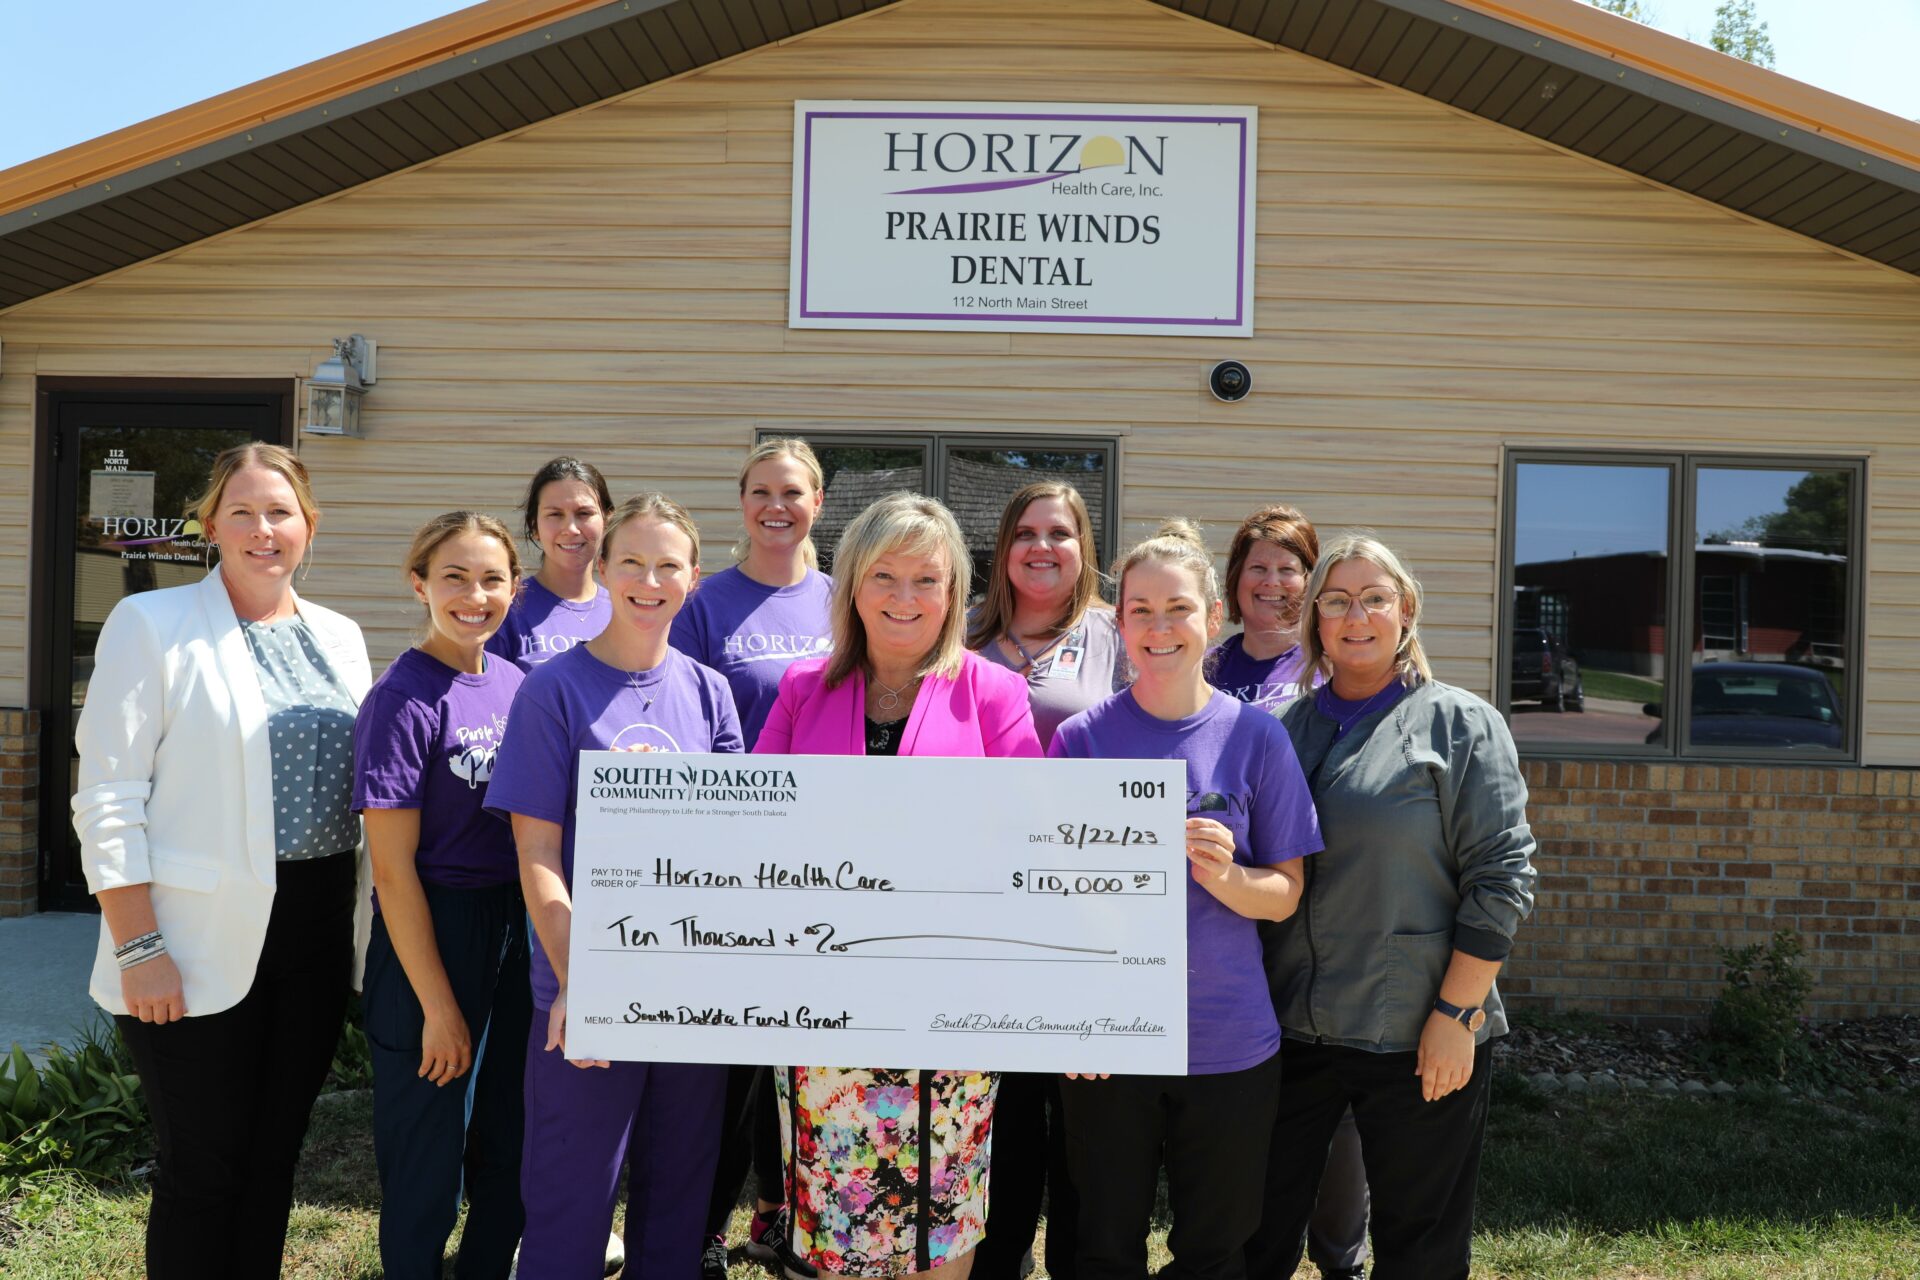 The South Dakota Community Foundation donated $10,000 to the Horizon Health Foundation as a matching gift to support Horizon Health Care’s Smiles for Miles program. Pictured, from left, are Horizon Health Foundation Executive Director Tracy Pardy; Erin Briggs a dentist,; Kaitlyn Hodges, Horizon Health Care chief dental officer; Michelle Scholtz, a dentist; Shawna Schwader; South Dakota Community Foundation Senior Program Officer Ginger Niemann; Amy Mentele; Megan Palmquist, a registered dental hygienist; Holly Litterick; and Sara Rus. The Smiles for Miles program, administered by Horizon Health Care and the Horizon Health Foundation, provides free preventative dental care to children under 5. Horizon Health has an office in Aberdeen. Courtesy photo